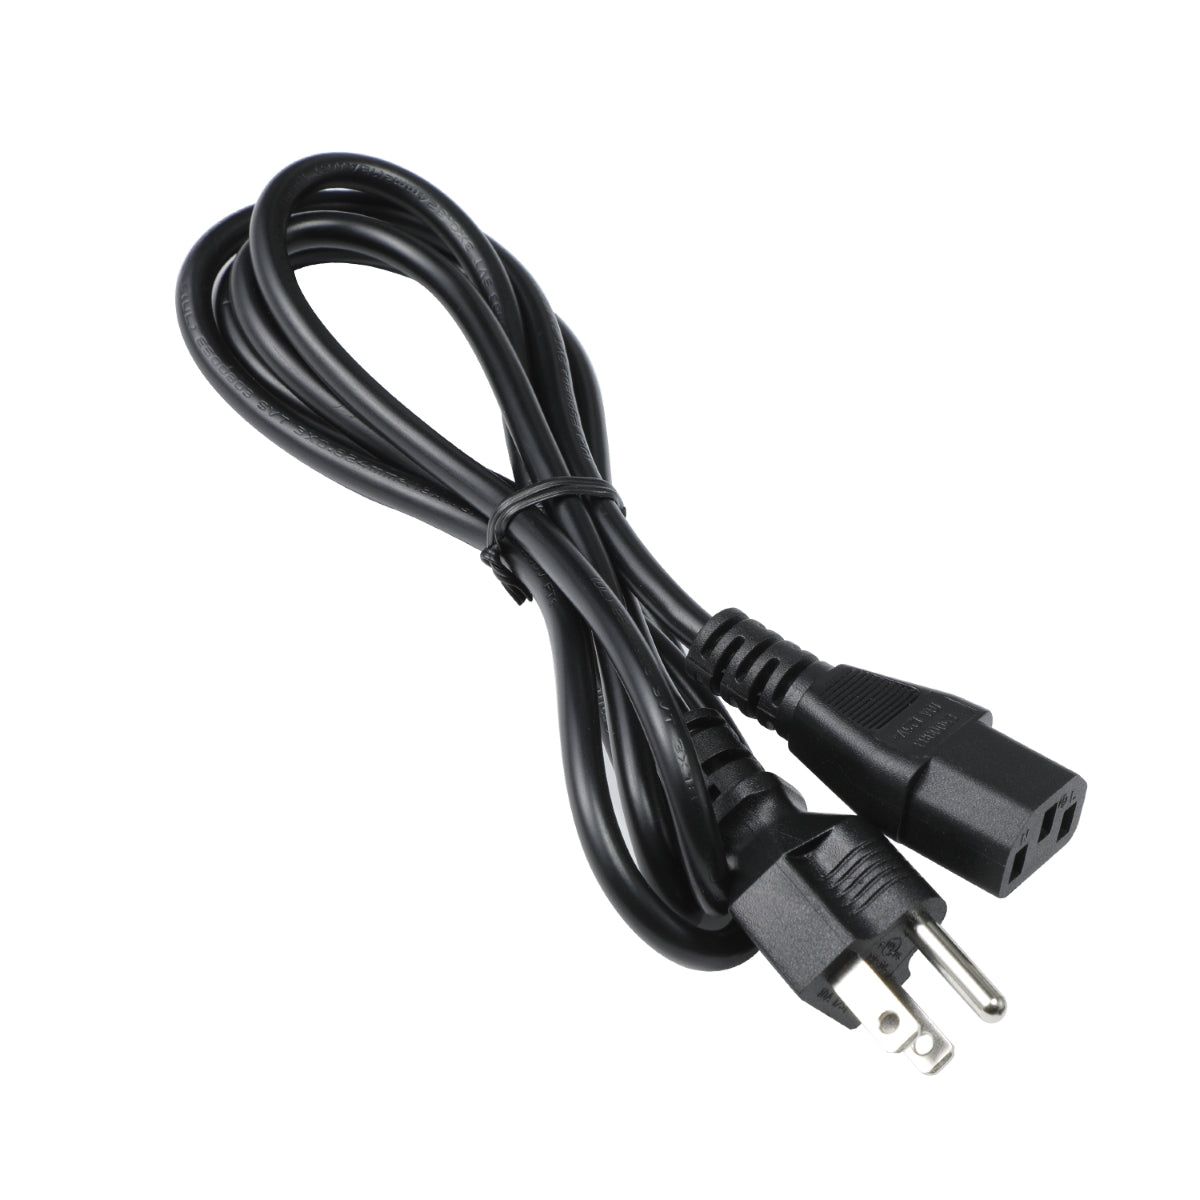 Power Cord for Acer RT280K Monitor.